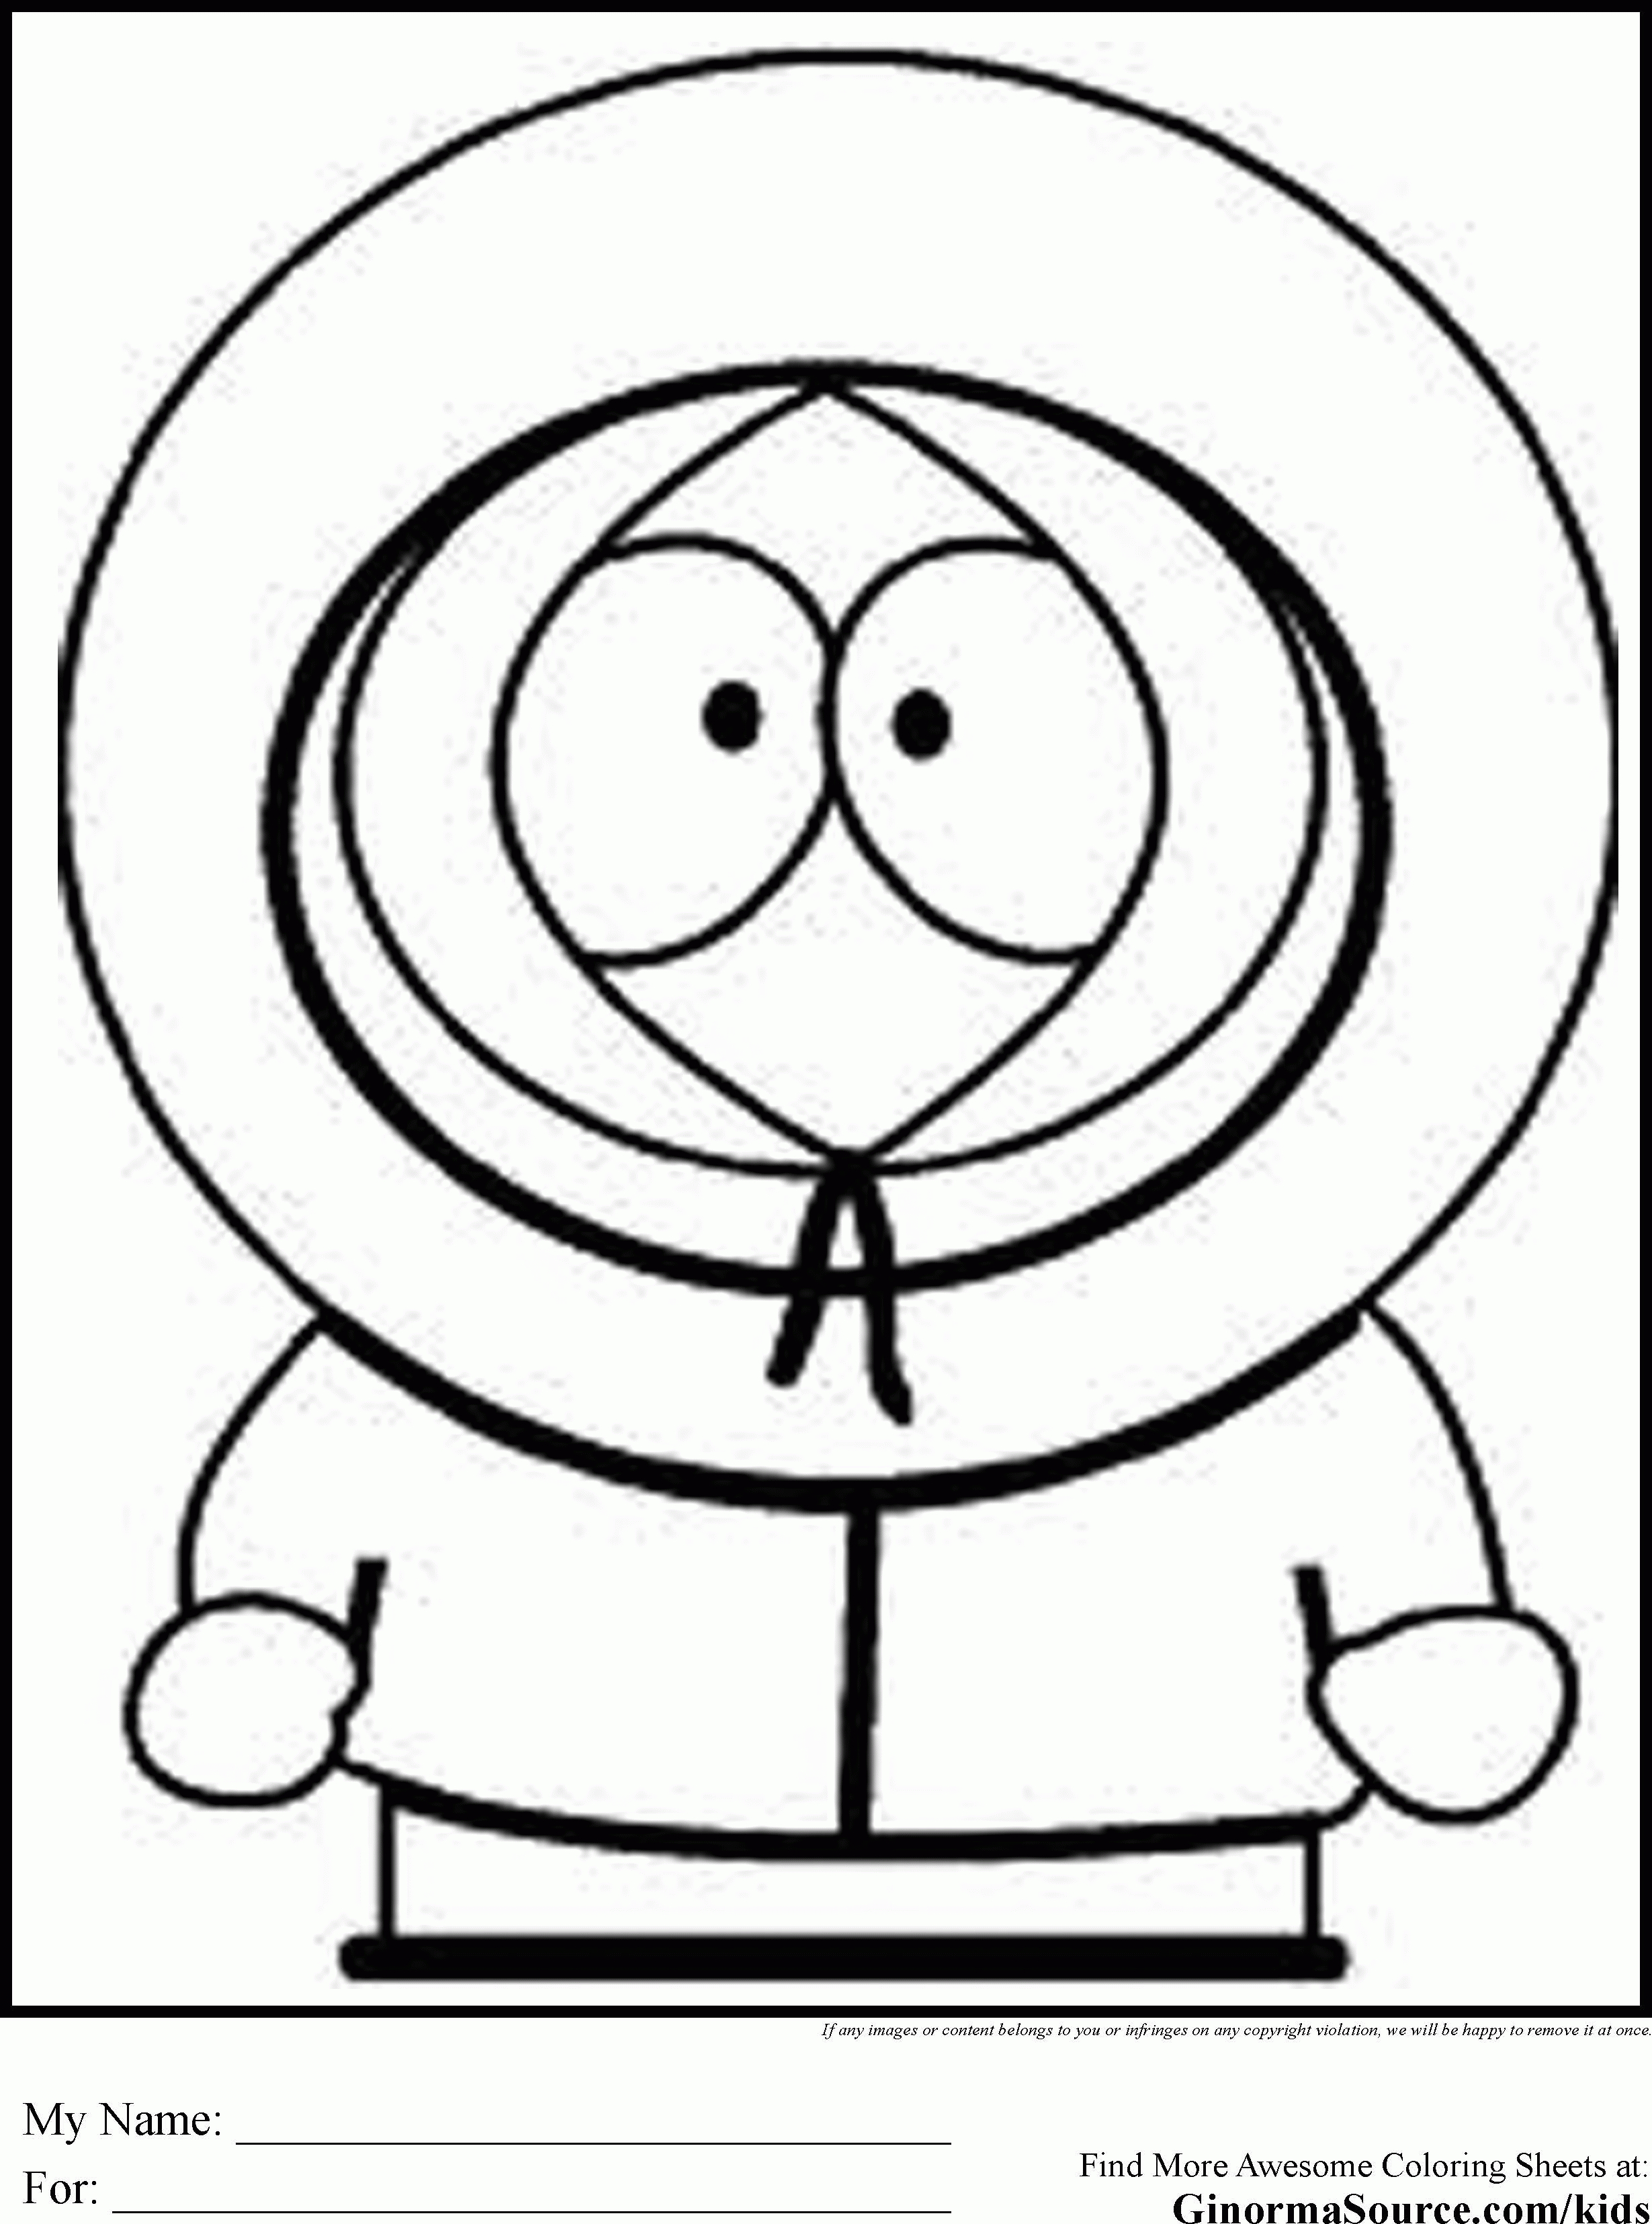 Southpark Coloring Pages For Teens | Coloring Pages | Coloring - Free Printable South Park Coloring Pages